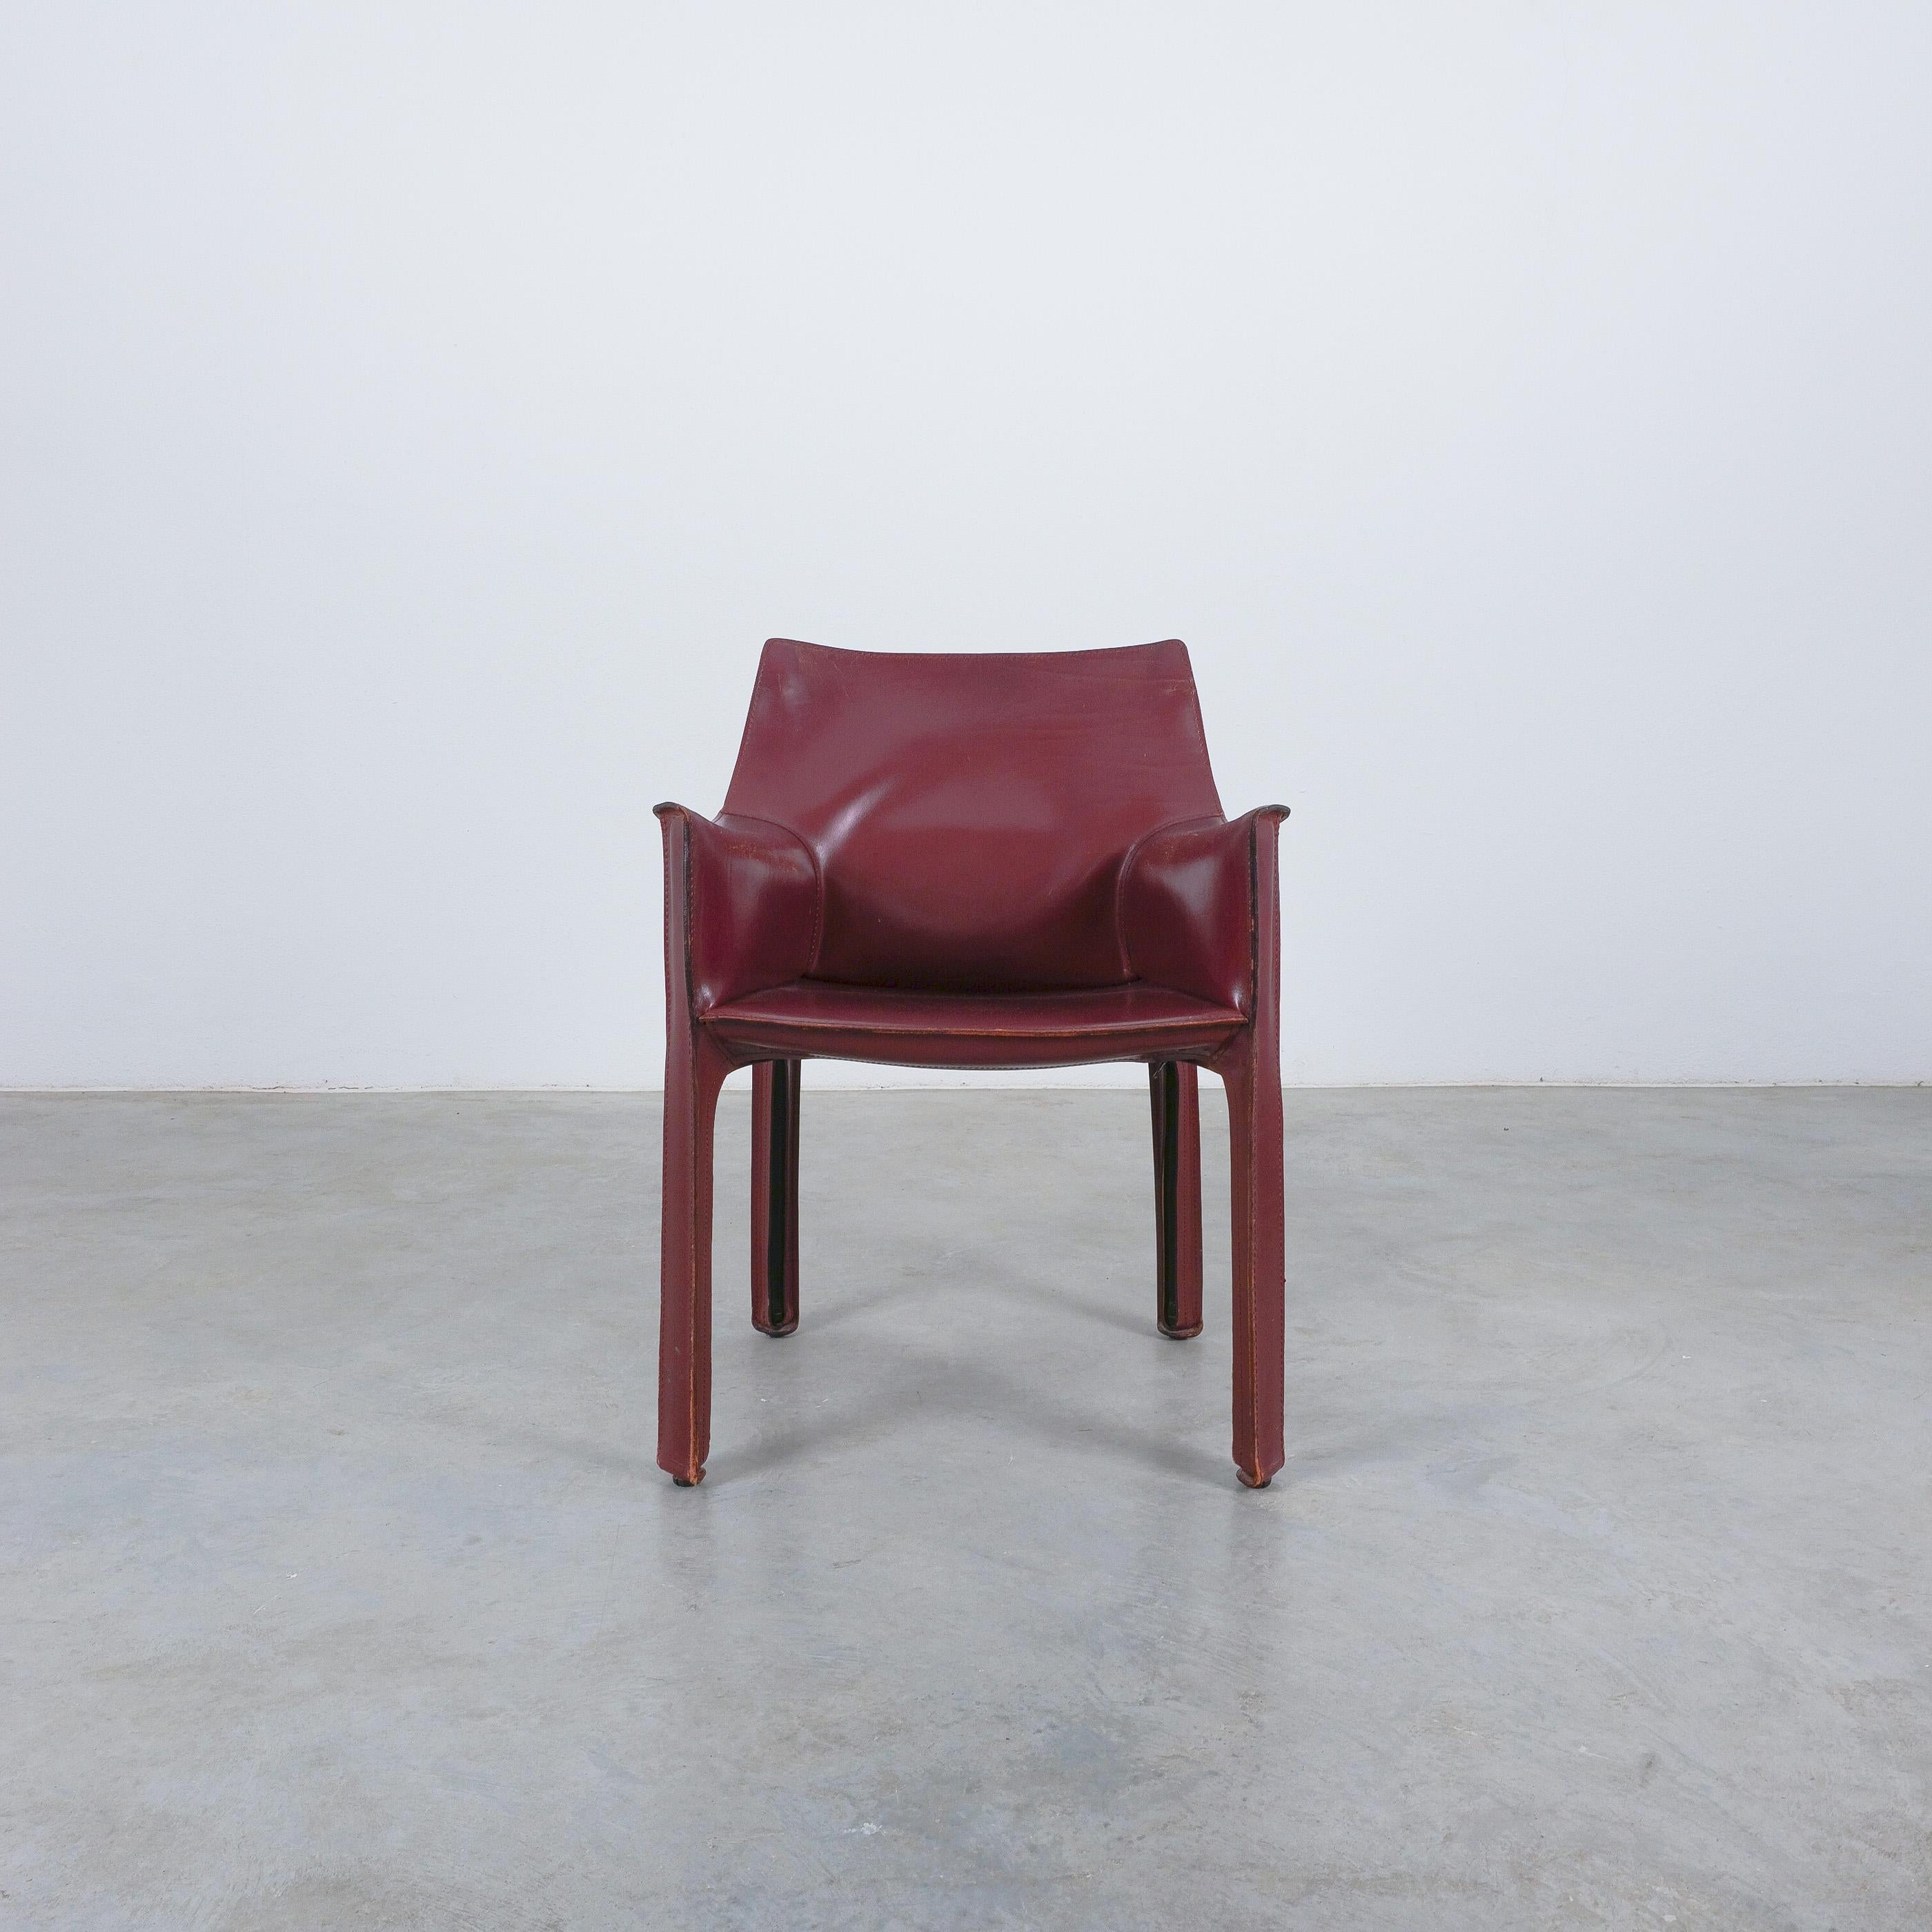 Steel Mario Bellini Cassina Cab 413 Burgundy Red Leather Dining Chairs, 1980